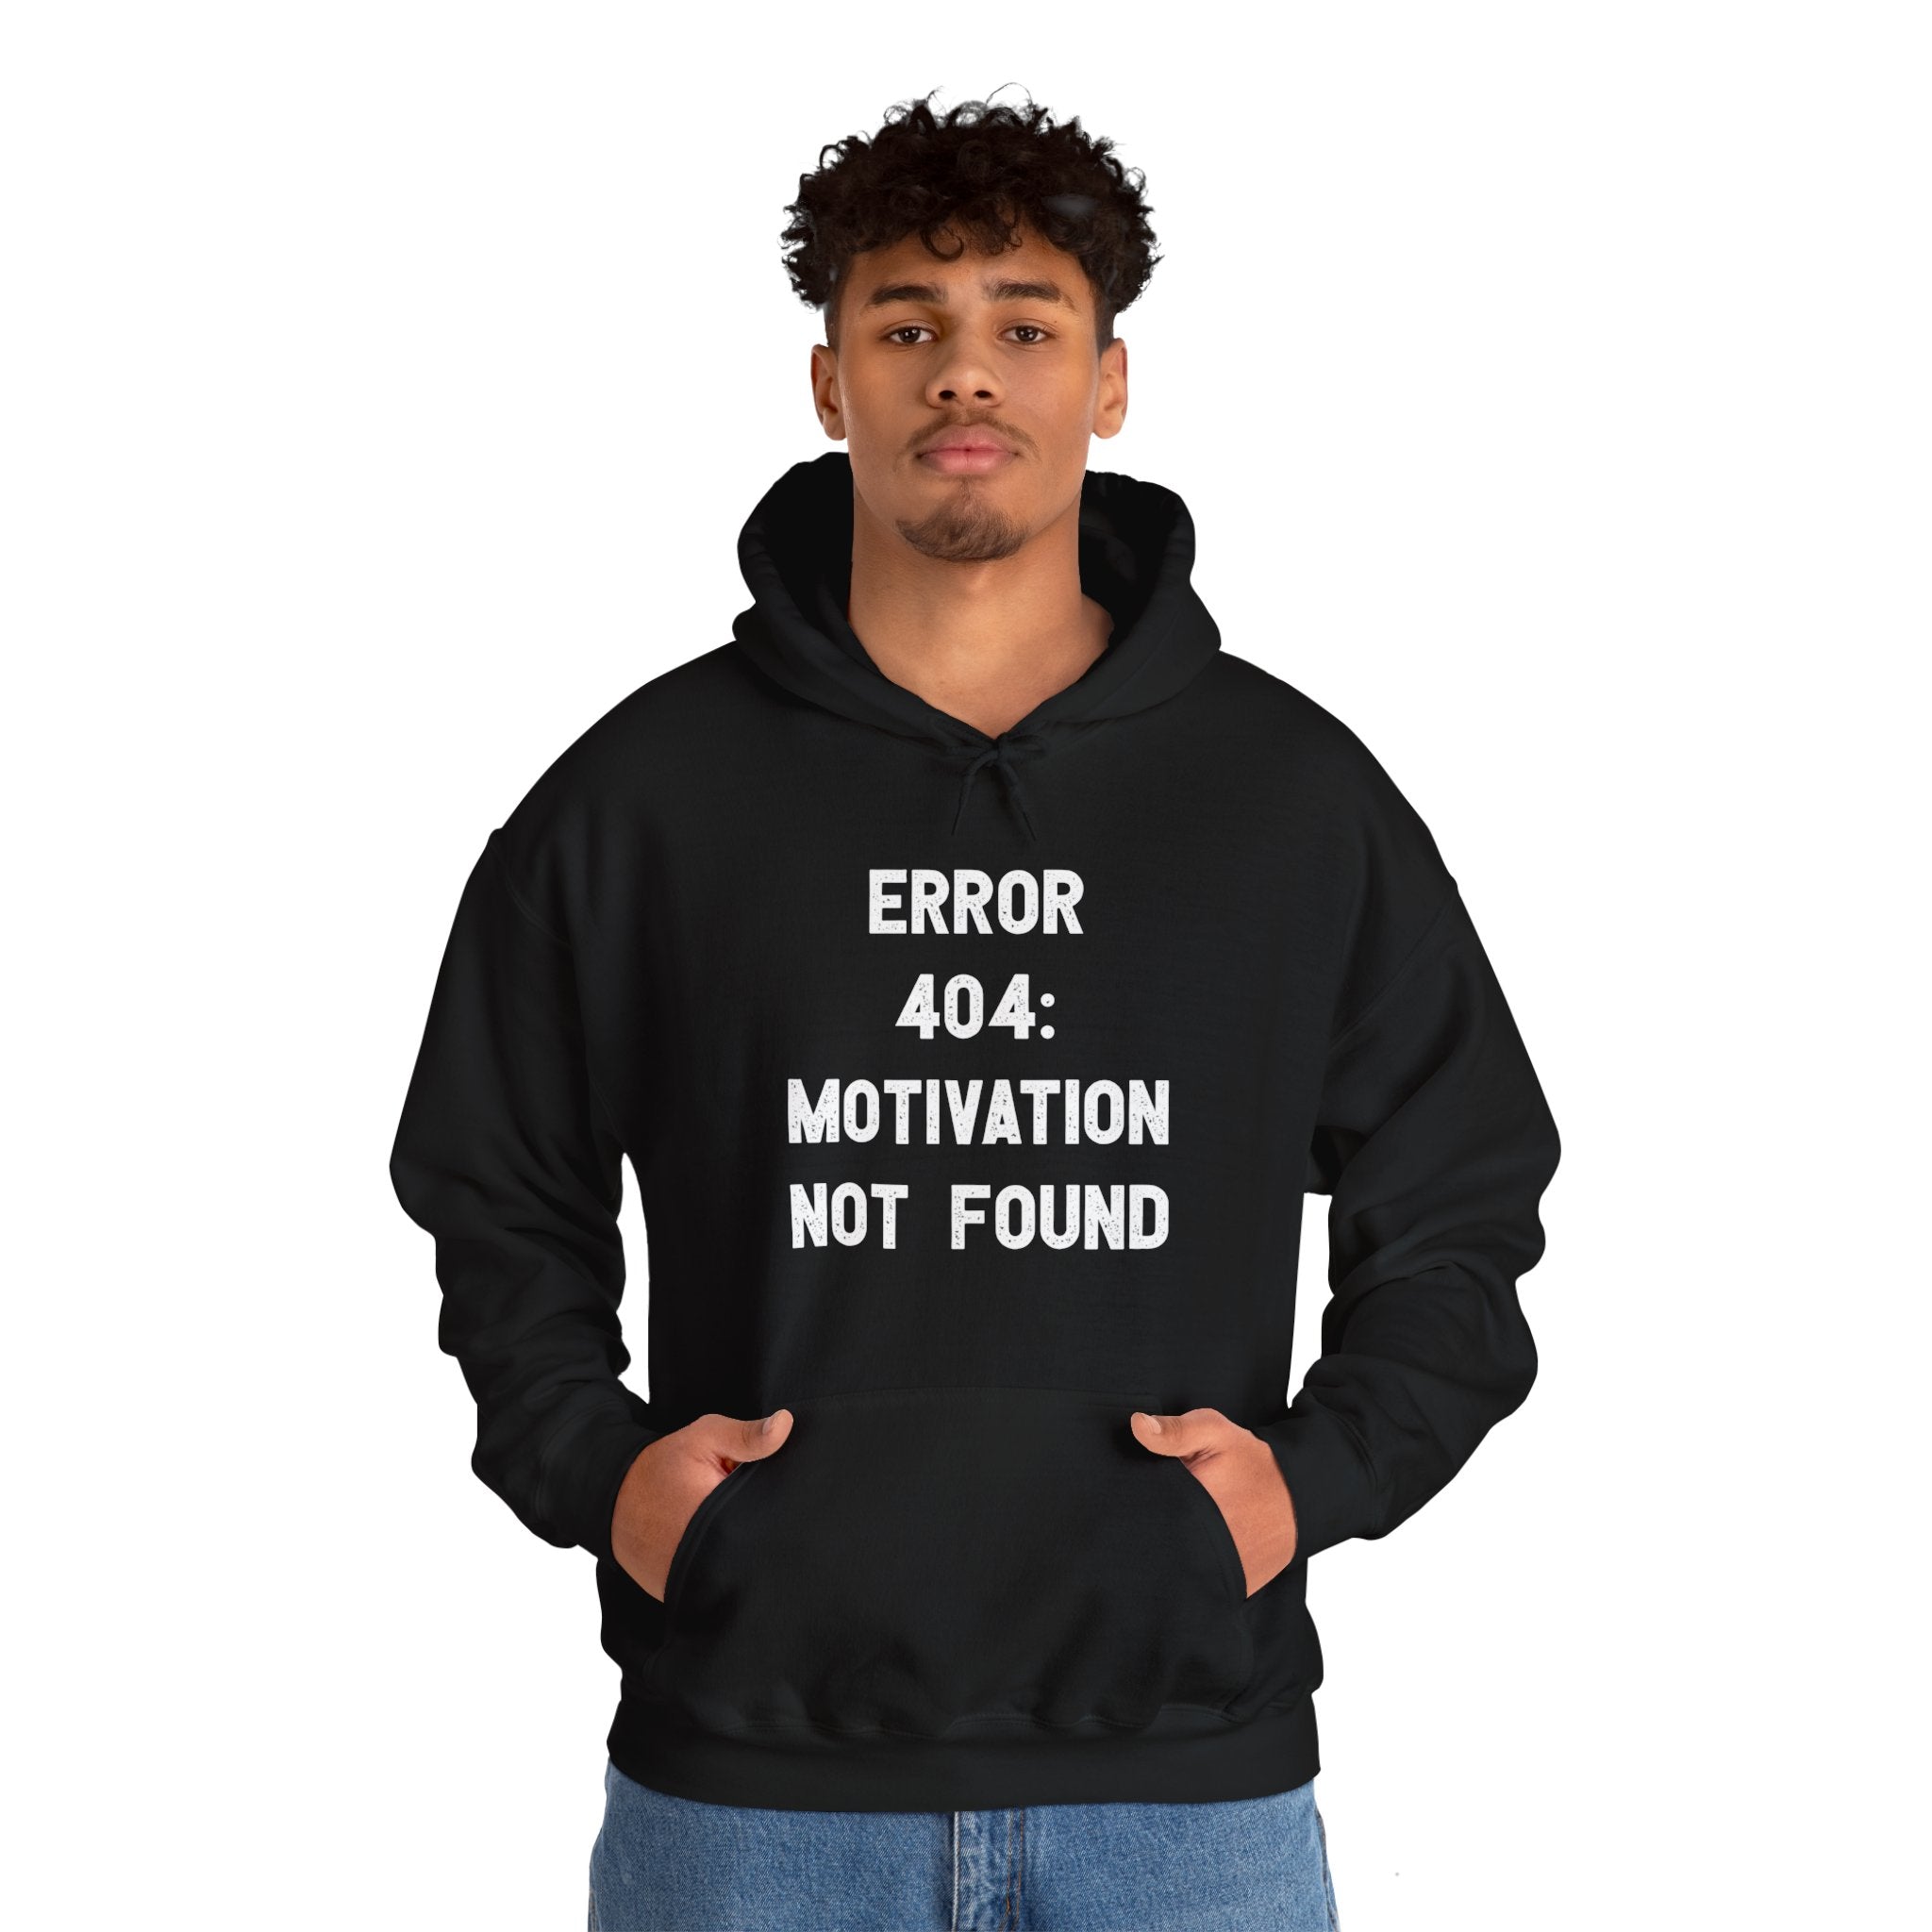 A person wearing the "Error 404: Motivation not found - Hooded Sweatshirt," epitomizing casual wear with a tech twist.